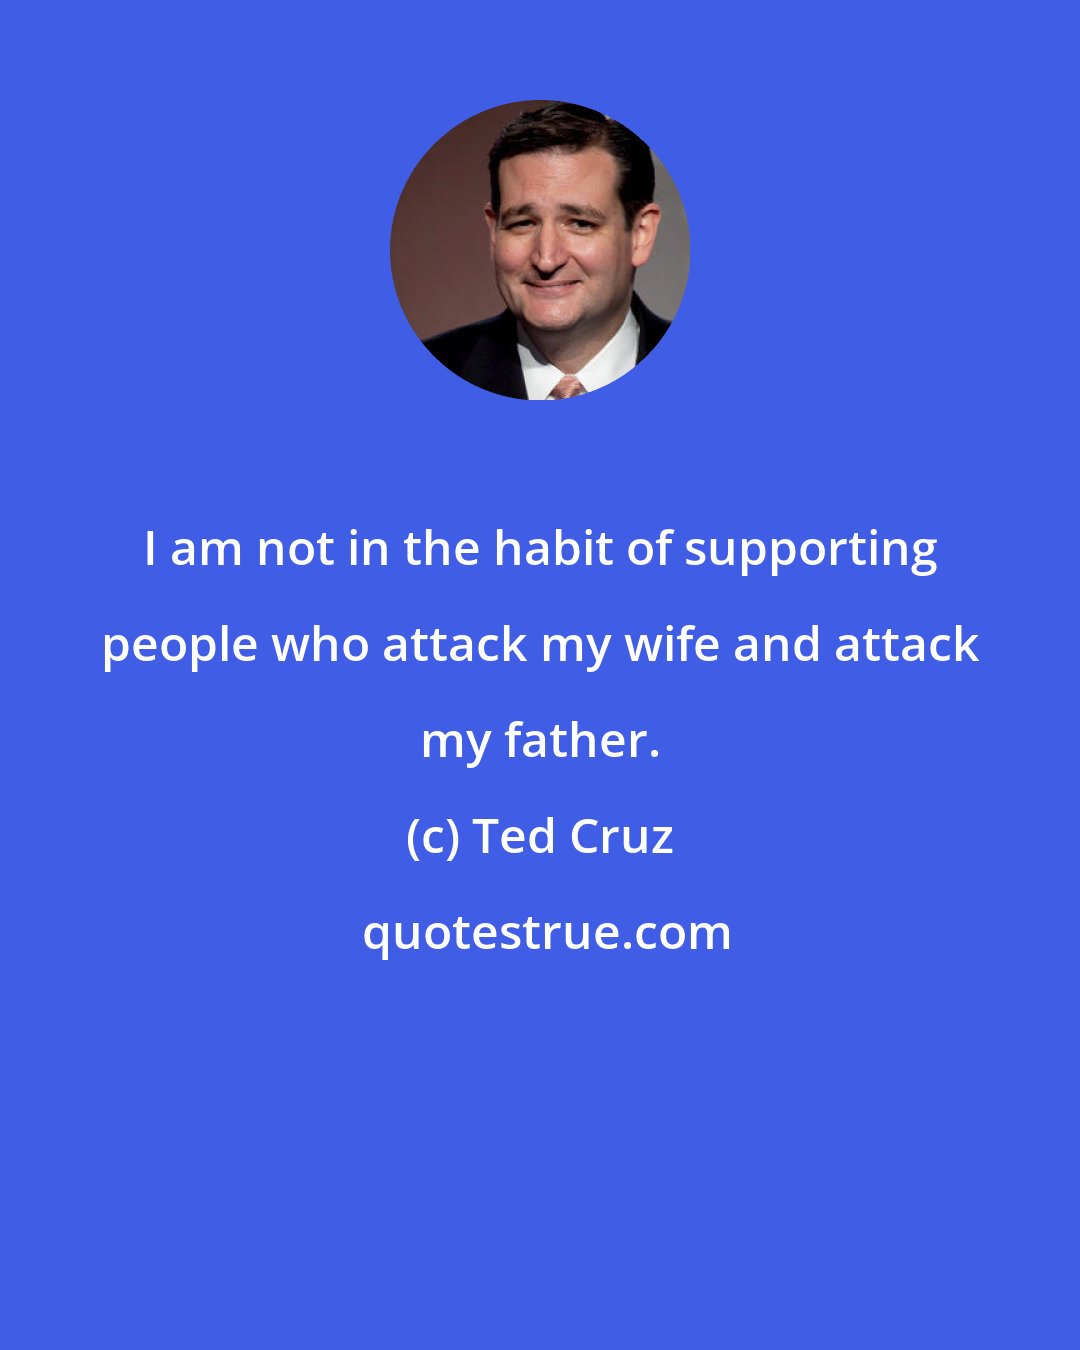 Ted Cruz: I am not in the habit of supporting people who attack my wife and attack my father.